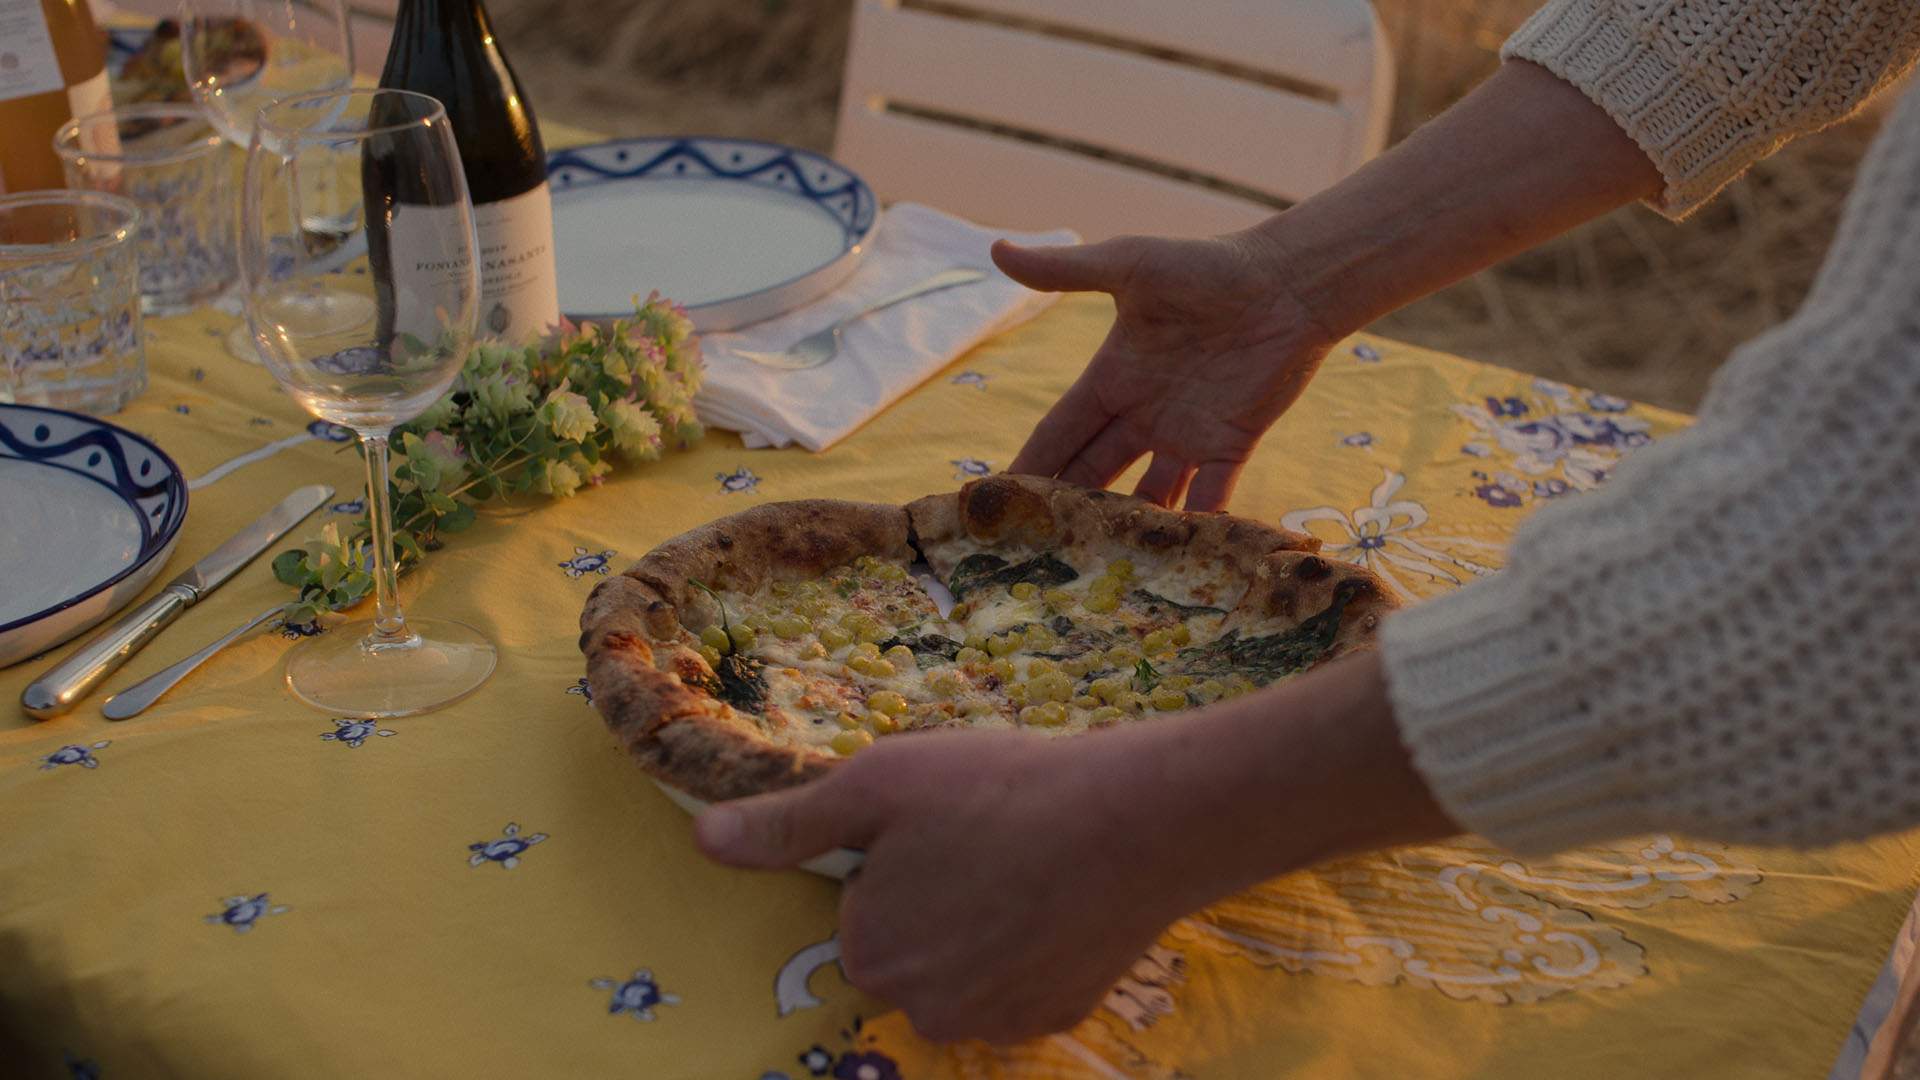 Netflix Is Serving Up a New Season of 'Chef's Table' That's All About Pizza